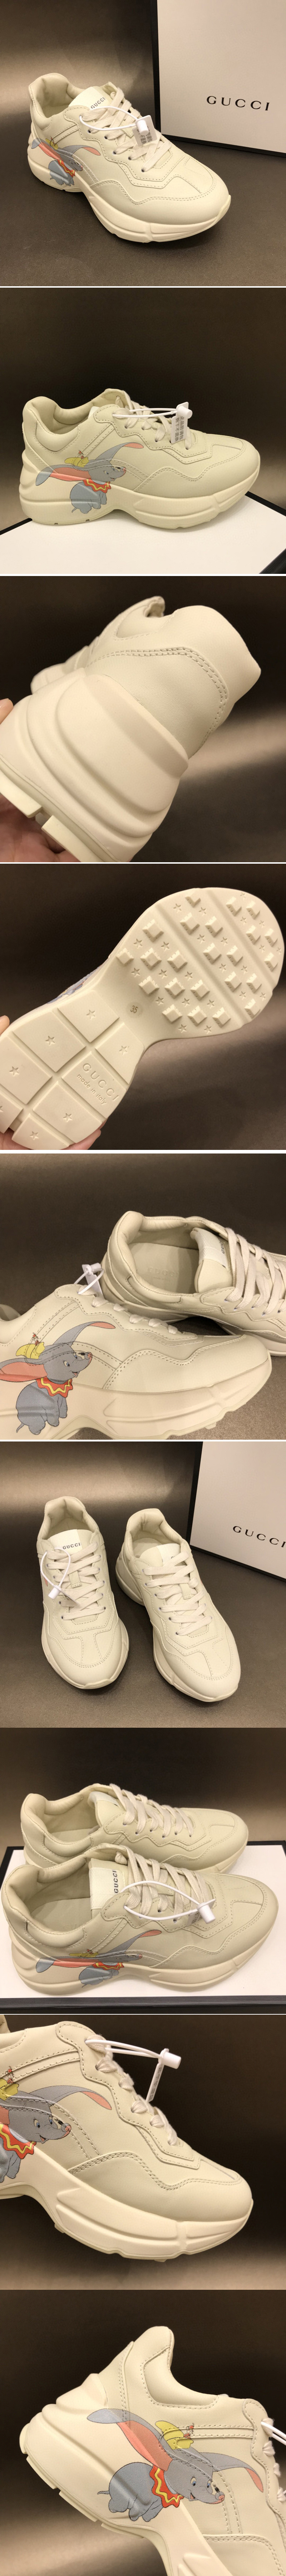 Replica Women and Men Gucci Rhyton Dumbo Sneakers in White Leather